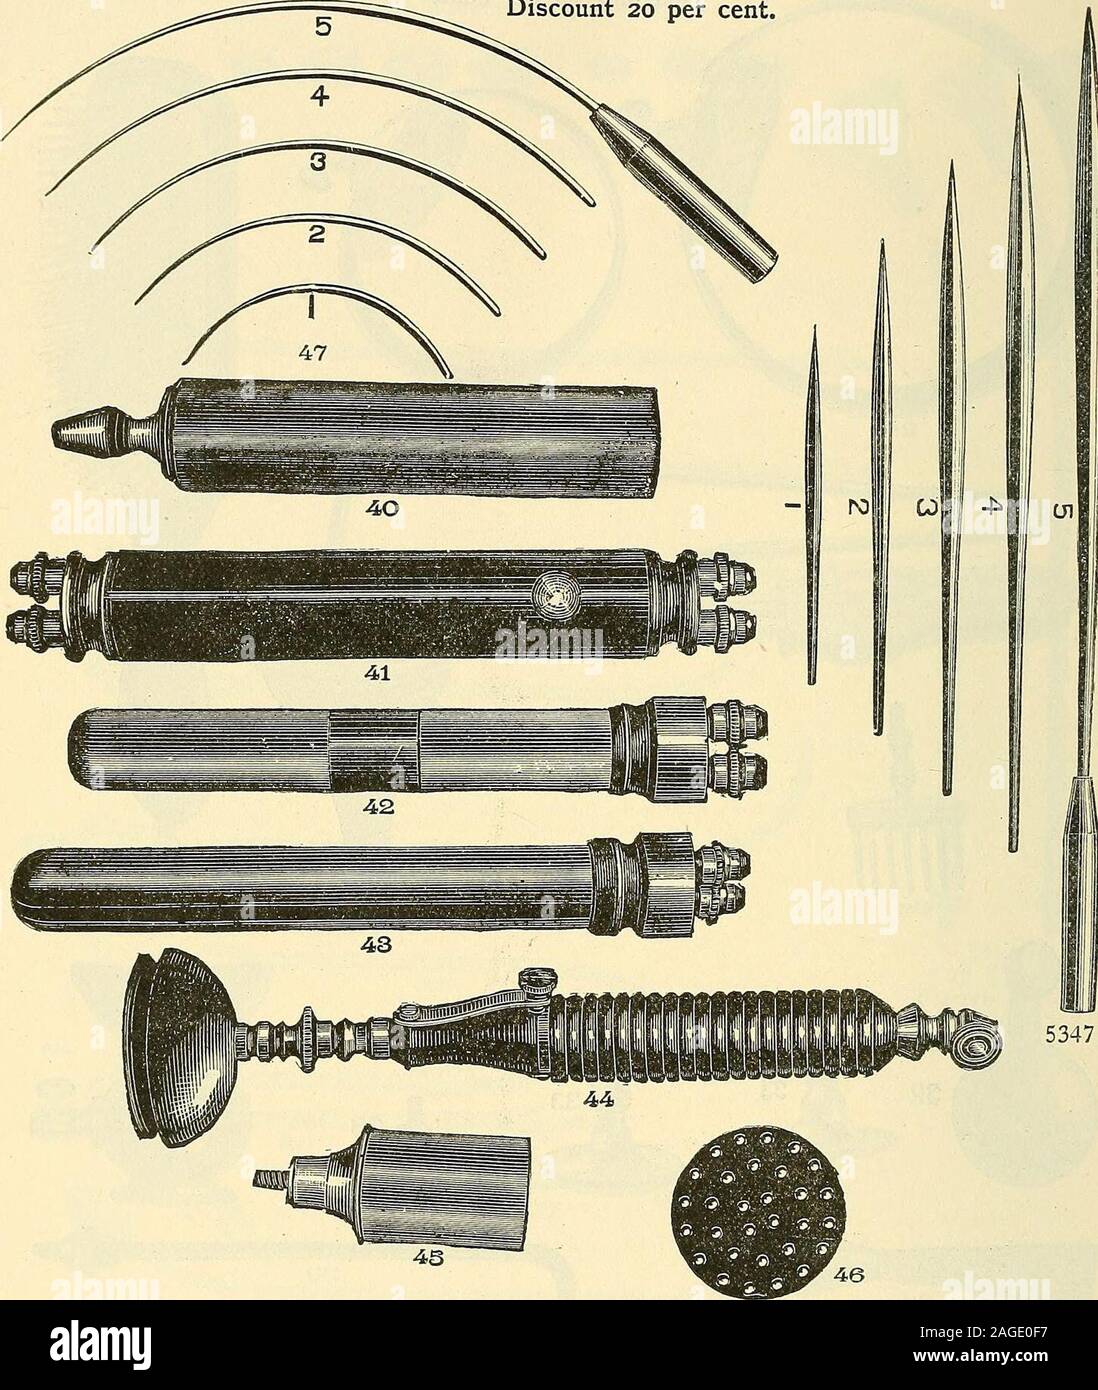 . Catalogue of Sharp & Smith : importers, manufacturers, wholesale and retail dealers in surgical instruments, deformity apparatus, artificial limbs, artificial eyes, elastic stockings, trusses, crutches, supporters, galvanic and faradic batteries, etc., surgeons' appliances of every description. FIG.^=5330^5331^5332 5333;3345335^5336*5337^5.^.38^5339 37 (cuts 29 and 30) Neck and Arm Electrode f| 2 00 (cut 31) Ear Electrode , 2 75 (cut 32) Ball Electrode 75 (cut 33) Disk Electrodes, three sizes each, 50 (cut 34) Eye Cup Electrode, new style 2 00 (cut 35) Hair Brush Electrode 2 50 (cut 36) Meta Stock Photo